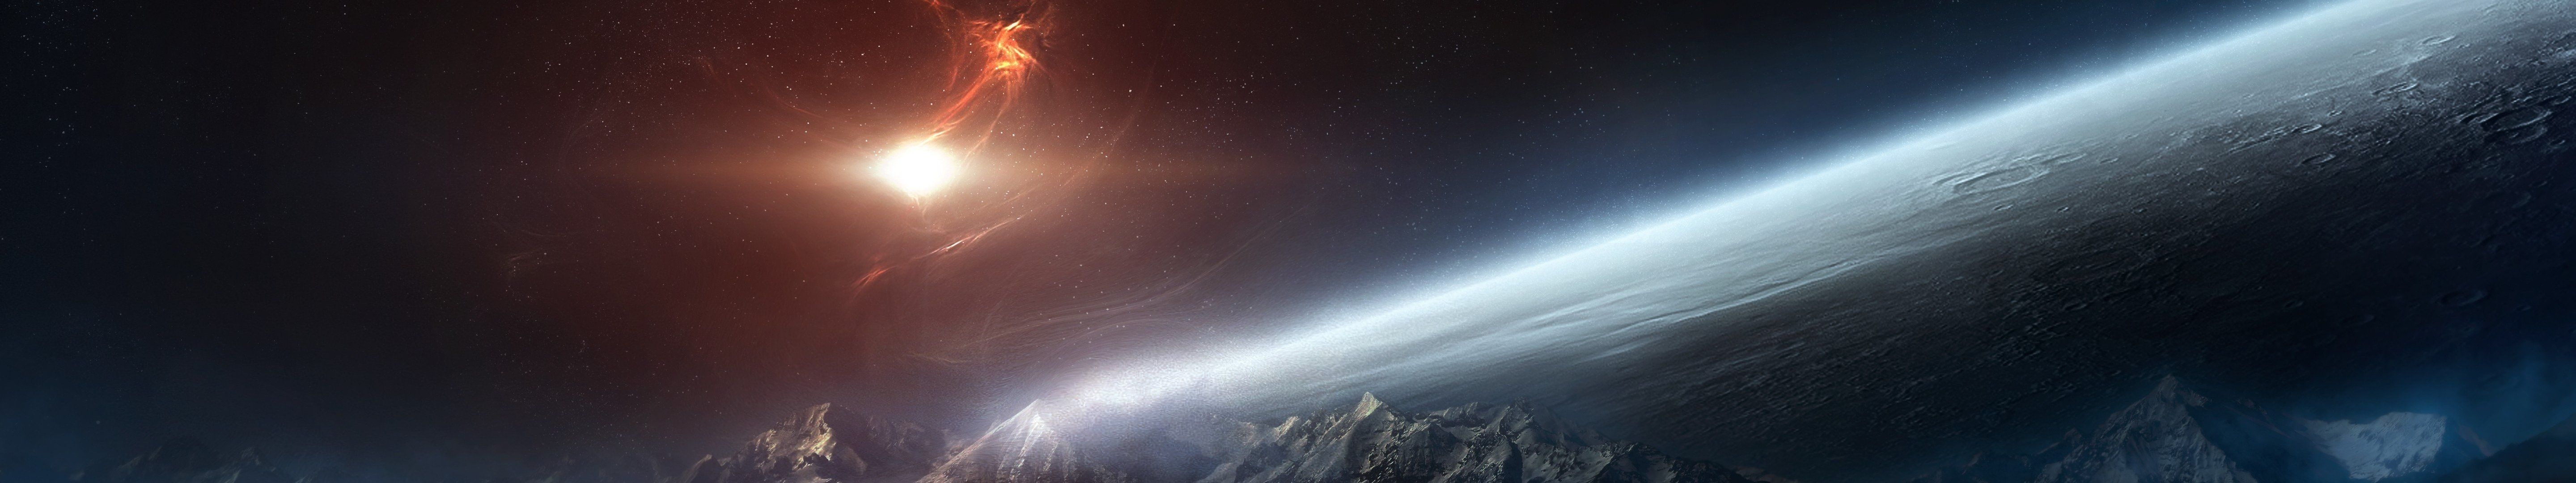 10 Top Space Triple Monitor Wallpaper FULL HD 1920×1080 For PC Background